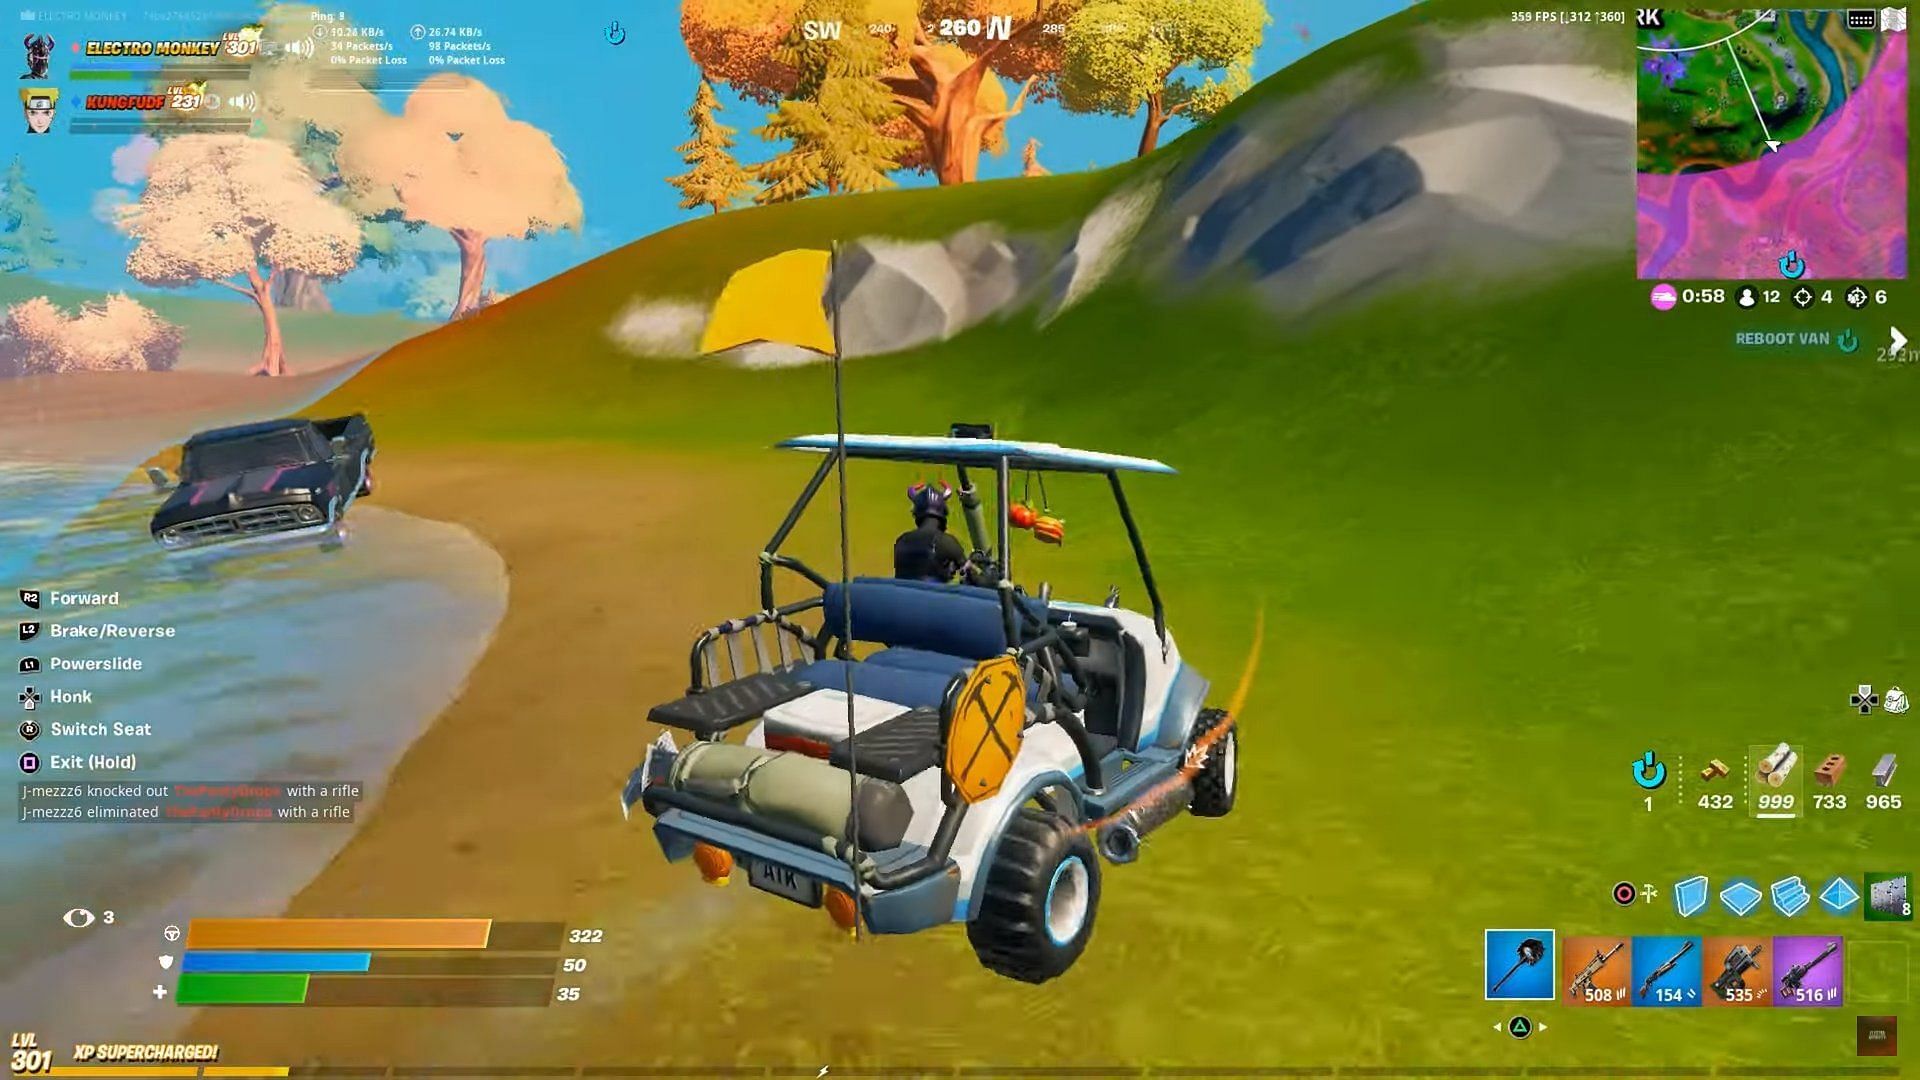 Fortnite has somehow brought back golf carts, potentially by mistake. Image via HYPEX on Twitter